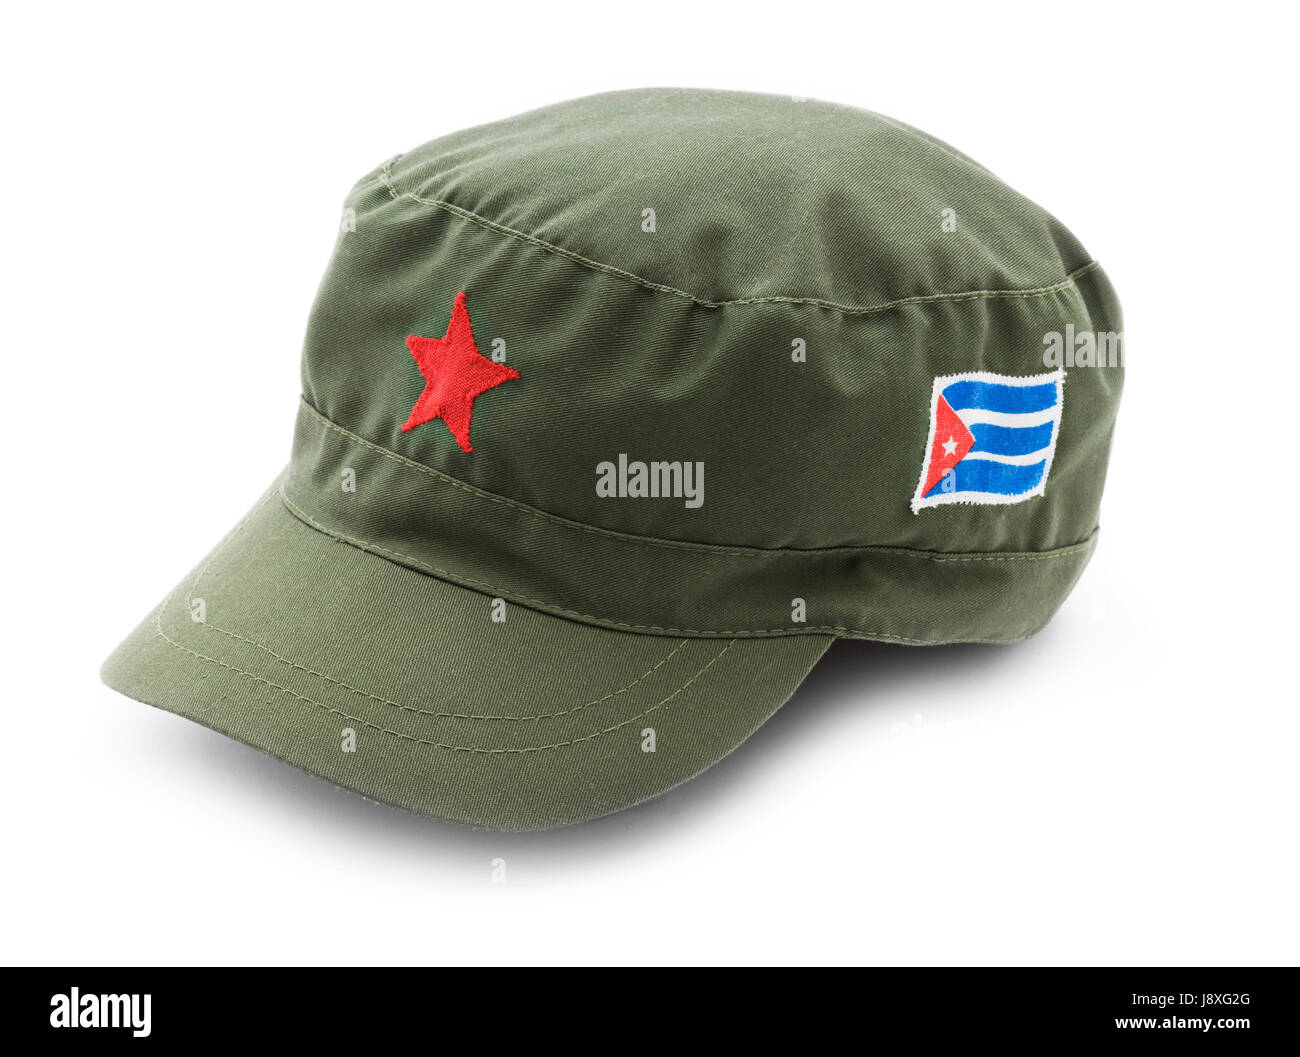 flag, traditional, cap, cuba, military, star, isolated, hat Photo - Alamy